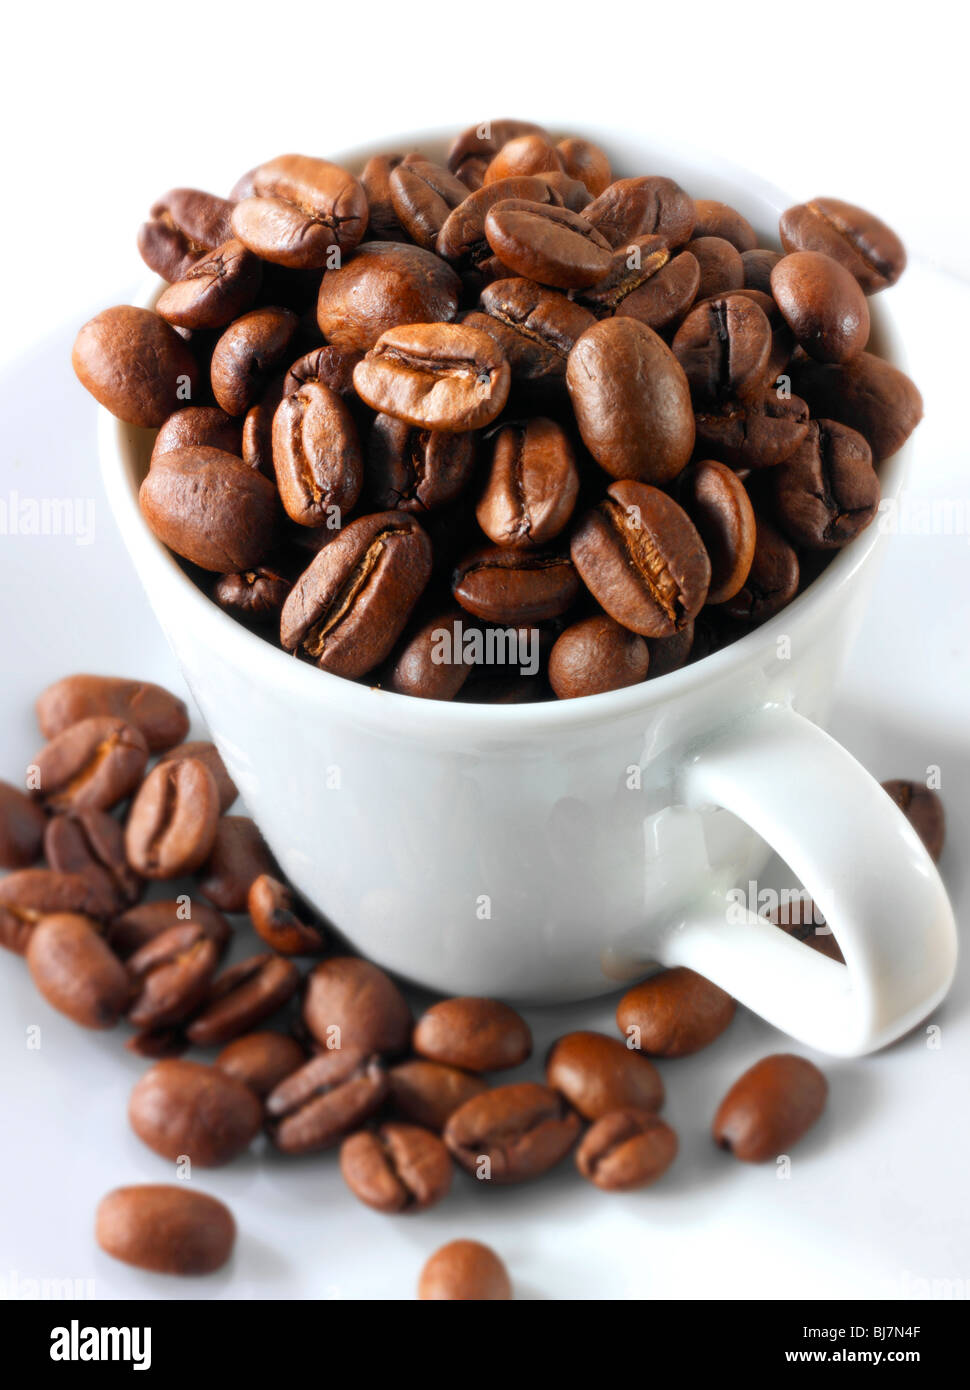 Coffee beans in a coffee cup. Stock Photo. Stock Photo